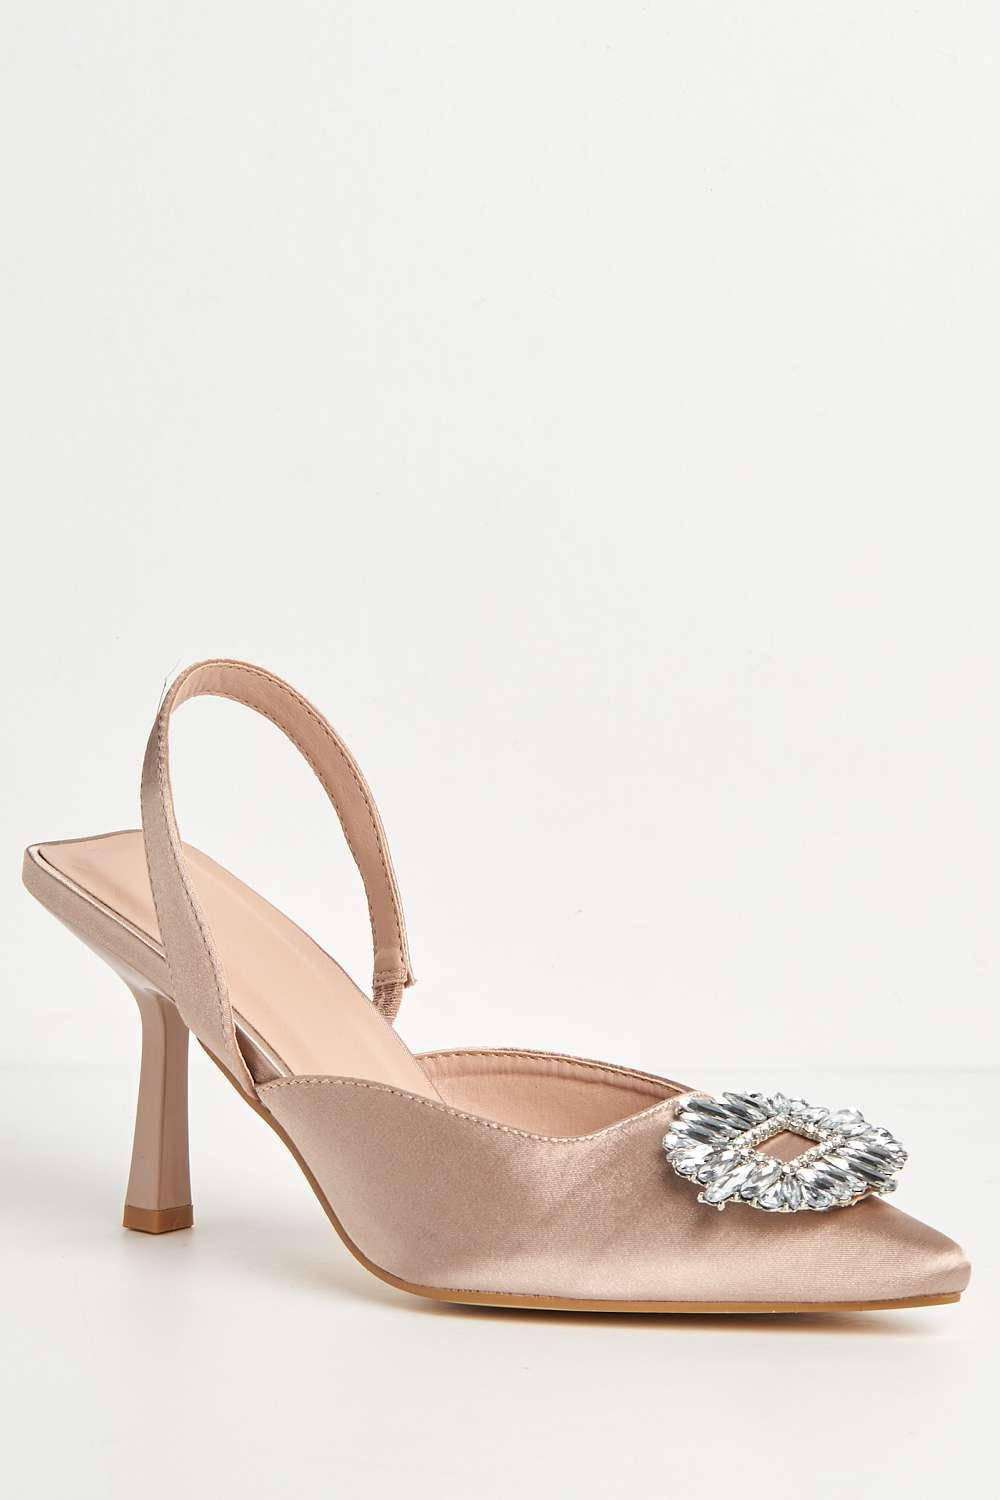 Miss Diva Amira Diamante Brooch Sling Back Court Shoes in Champagne Satin